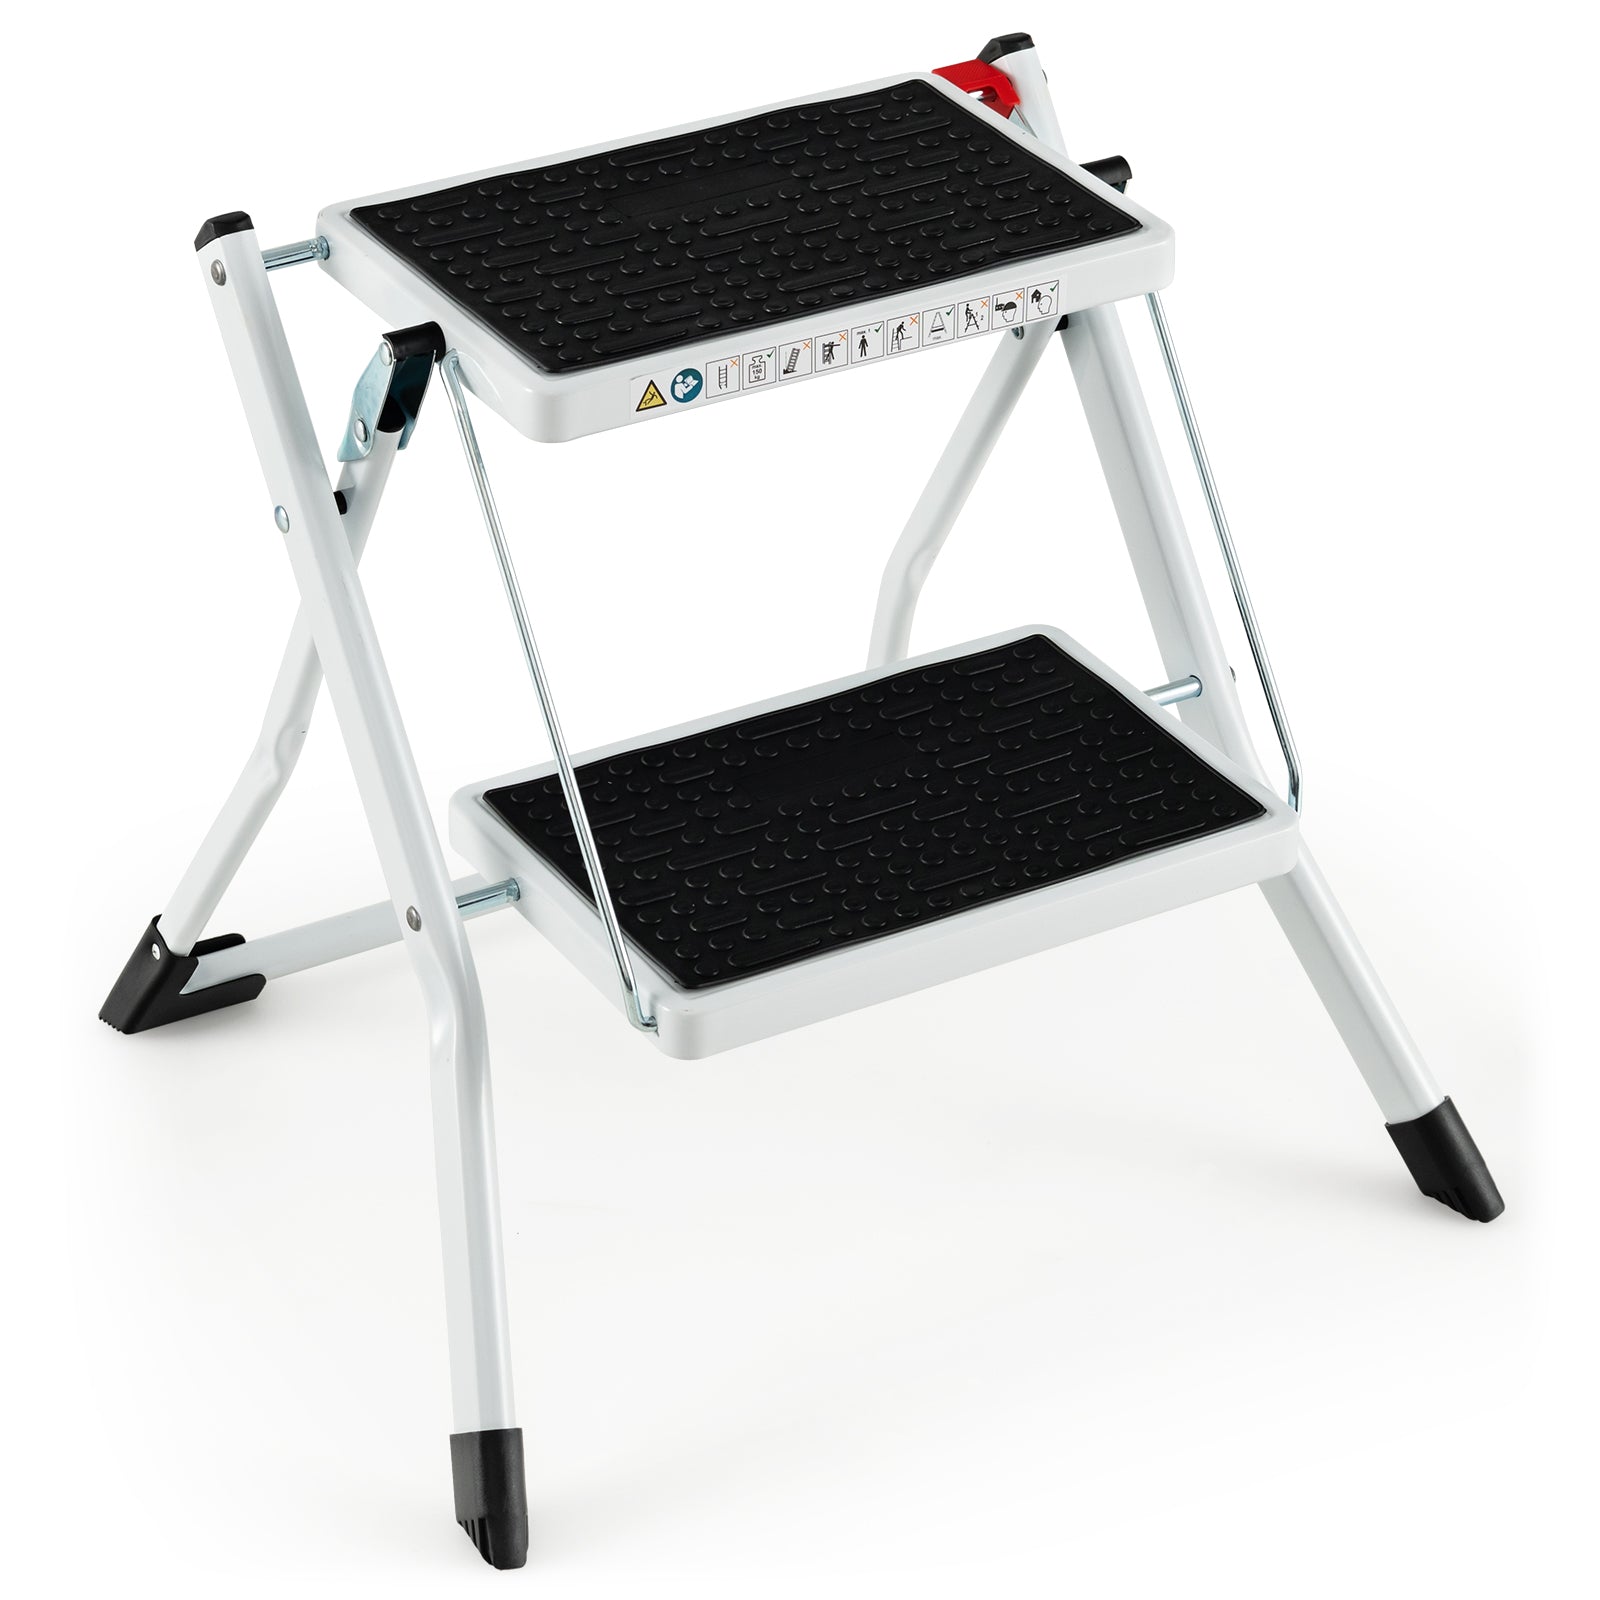 2 Step Portable Ladder with Handle and Non-slip Foot Mats-White